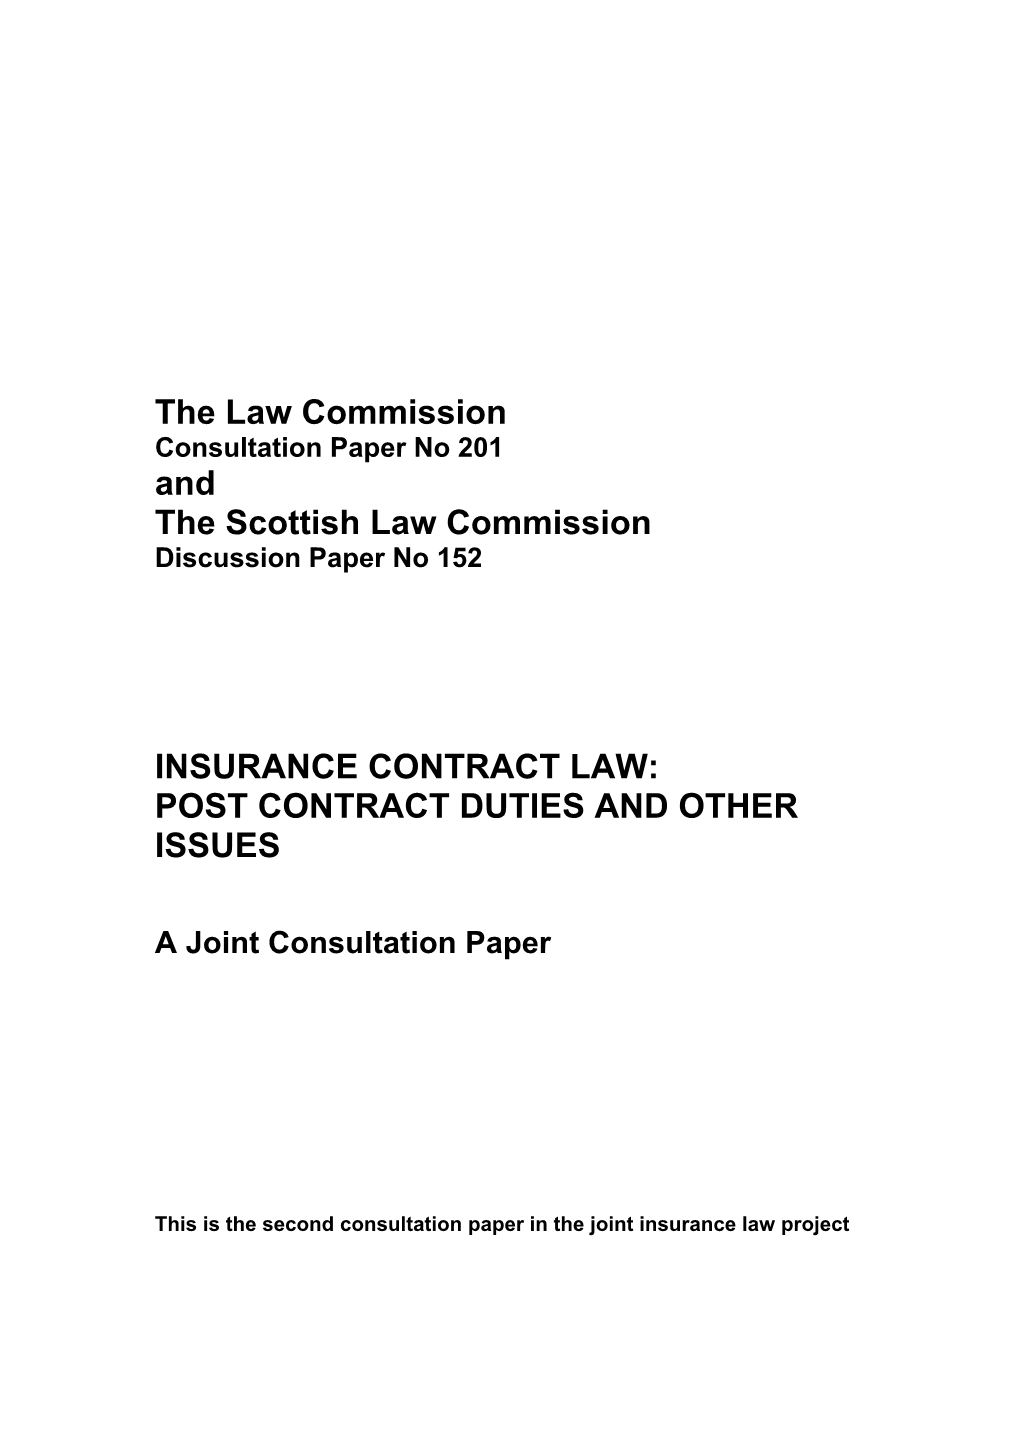 Insurance Contract Law: Post Contract Duties and Other Issues